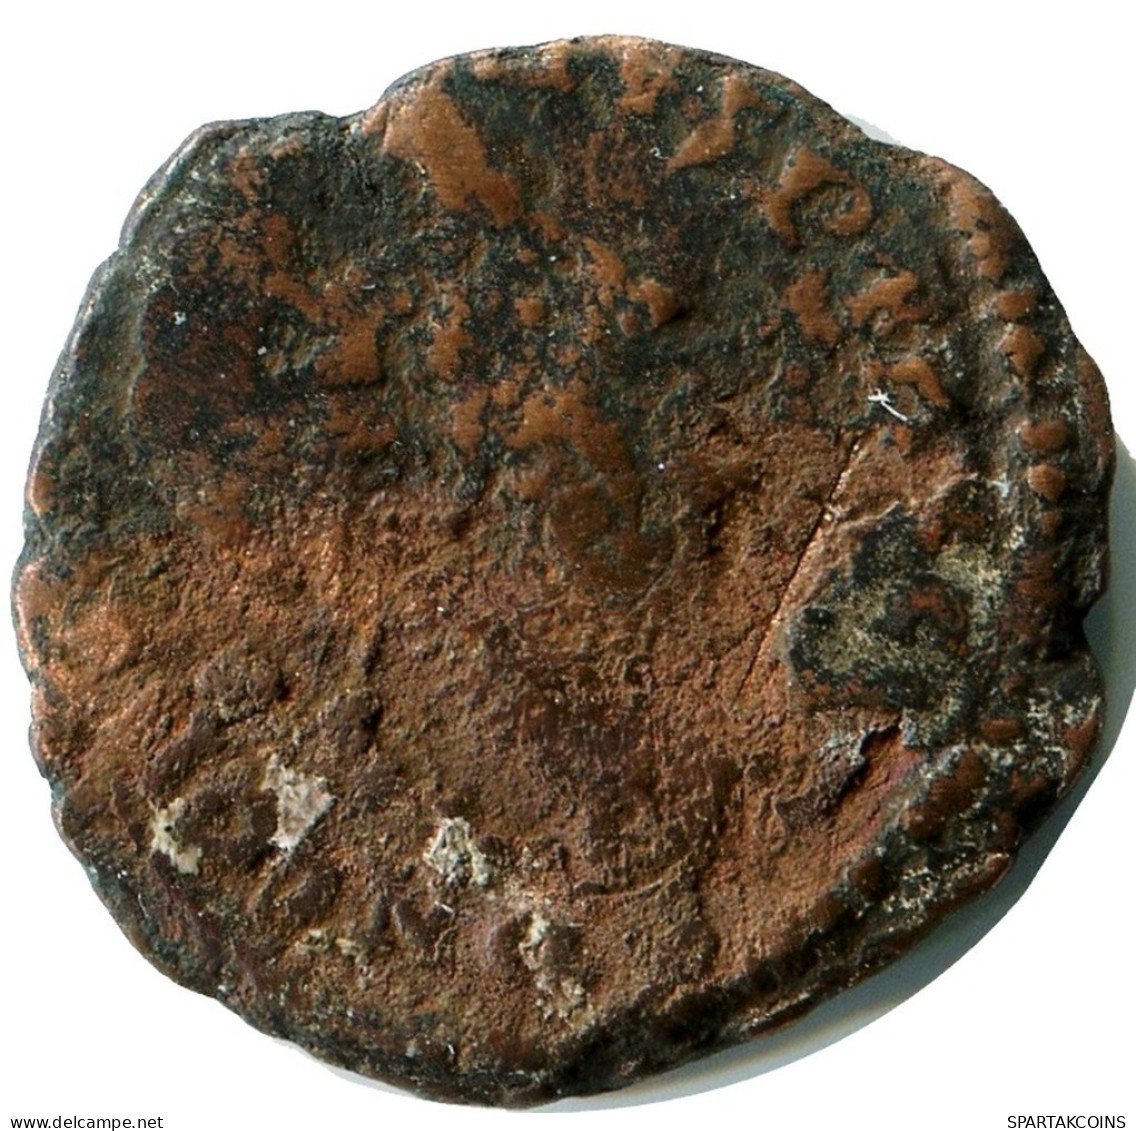 CONSTANS MINTED IN CONSTANTINOPLE FOUND IN IHNASYAH HOARD EGYPT #ANC11938.14.D.A - The Christian Empire (307 AD Tot 363 AD)